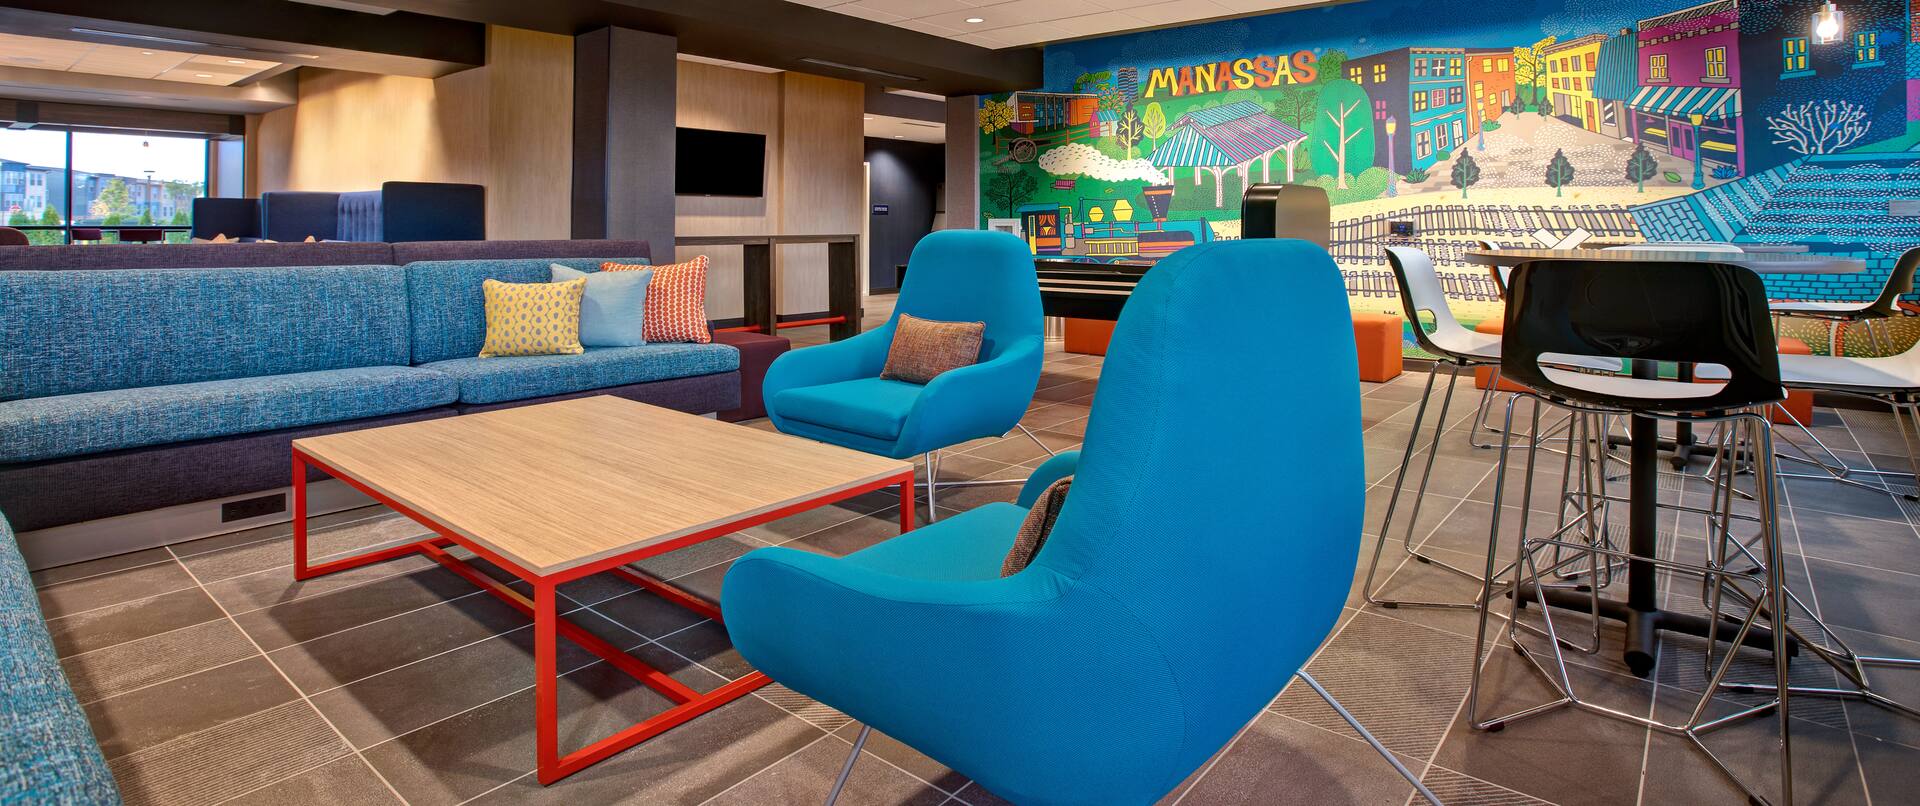 lobby seating area with mural 